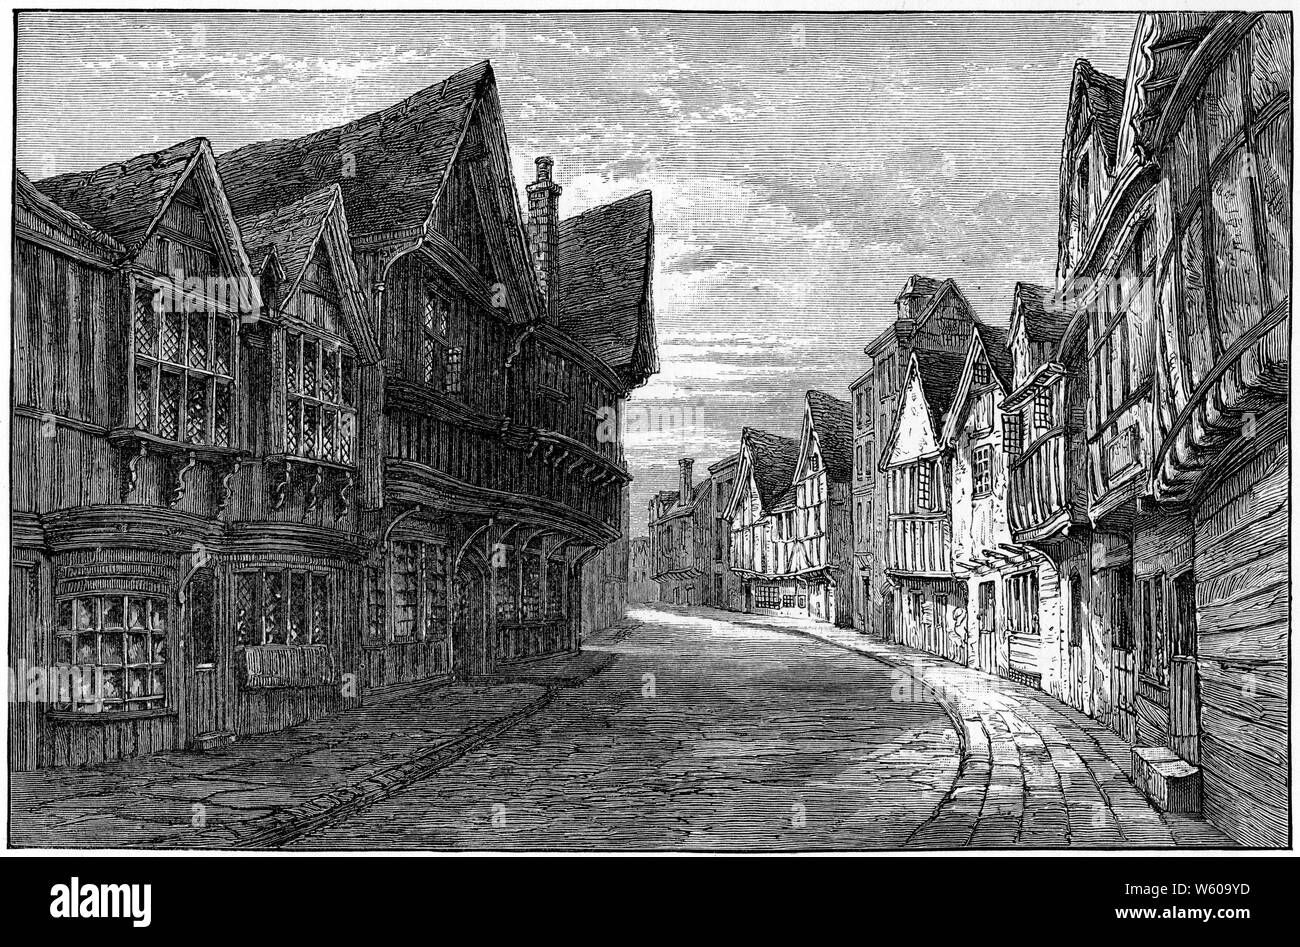 Friars' Street (Friar Street), Worcester, 1830. From J. Britton's 'Picturesque Antiquities of English Cities', 1830. Stock Photo